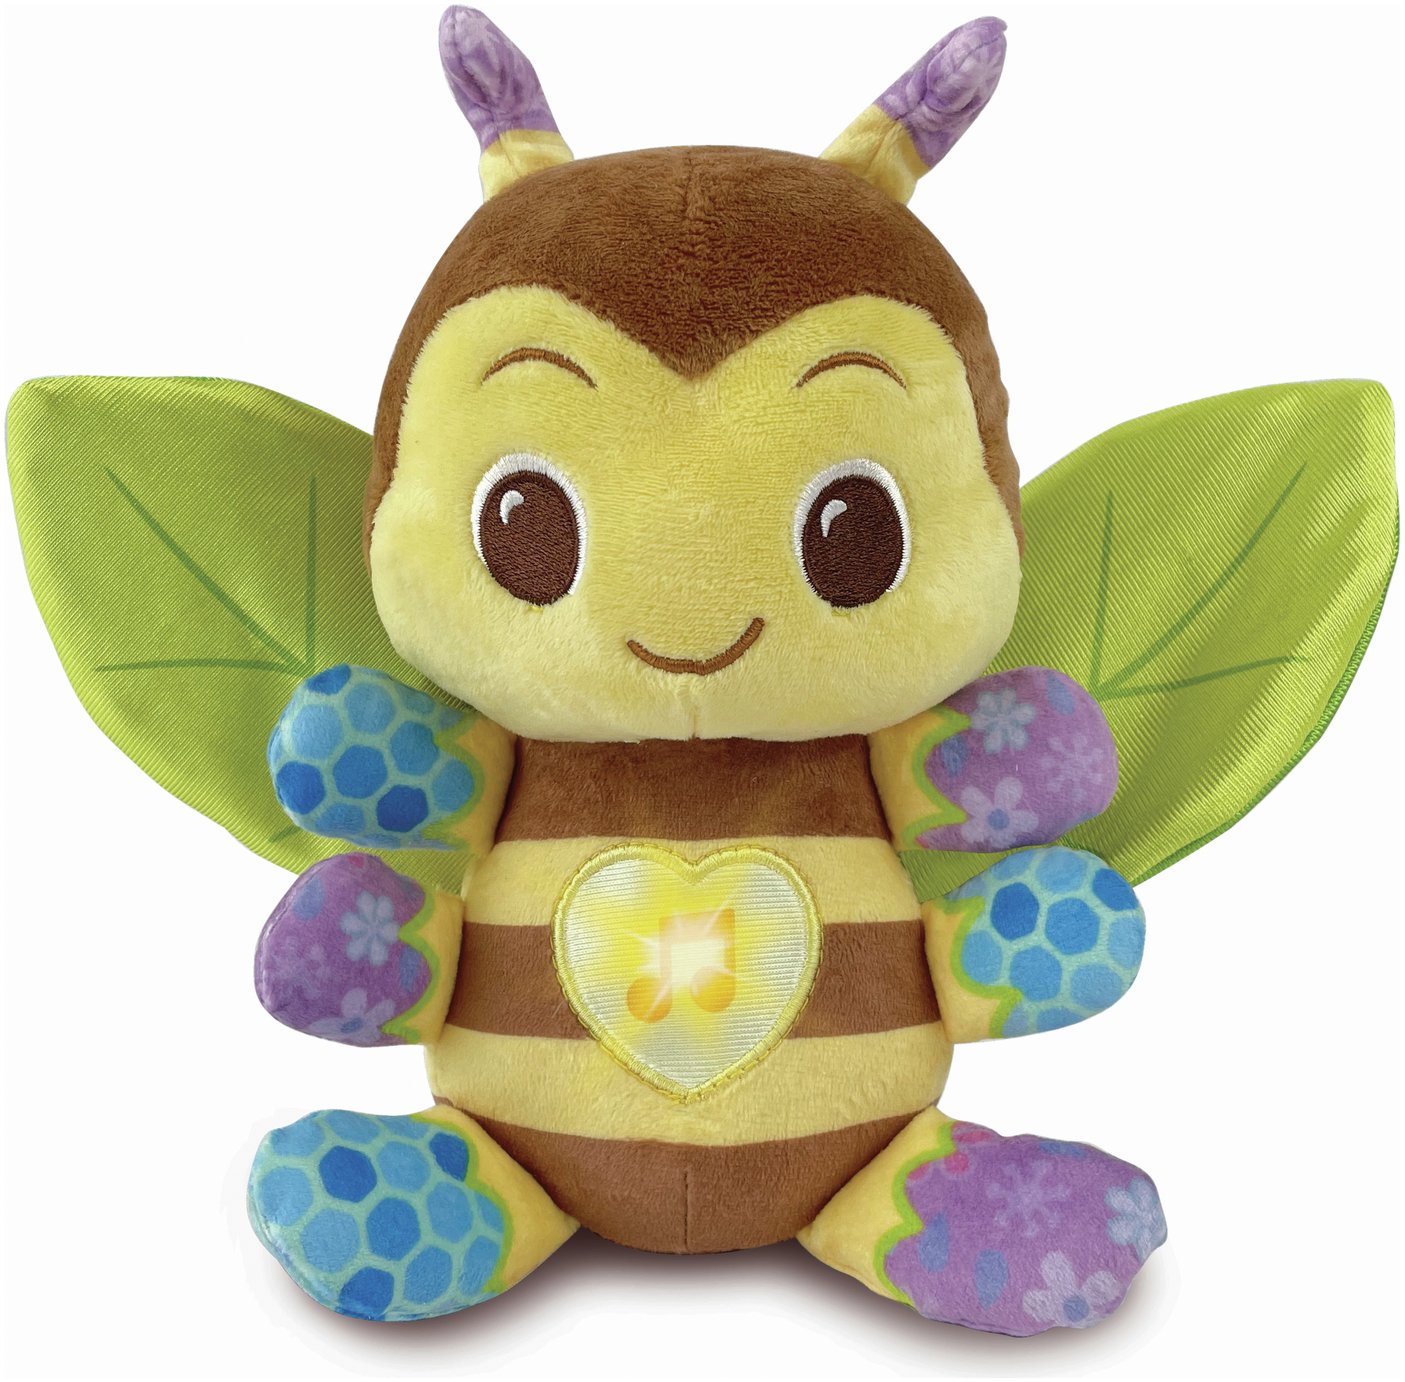 Vtech Busy Eco Musical Bee